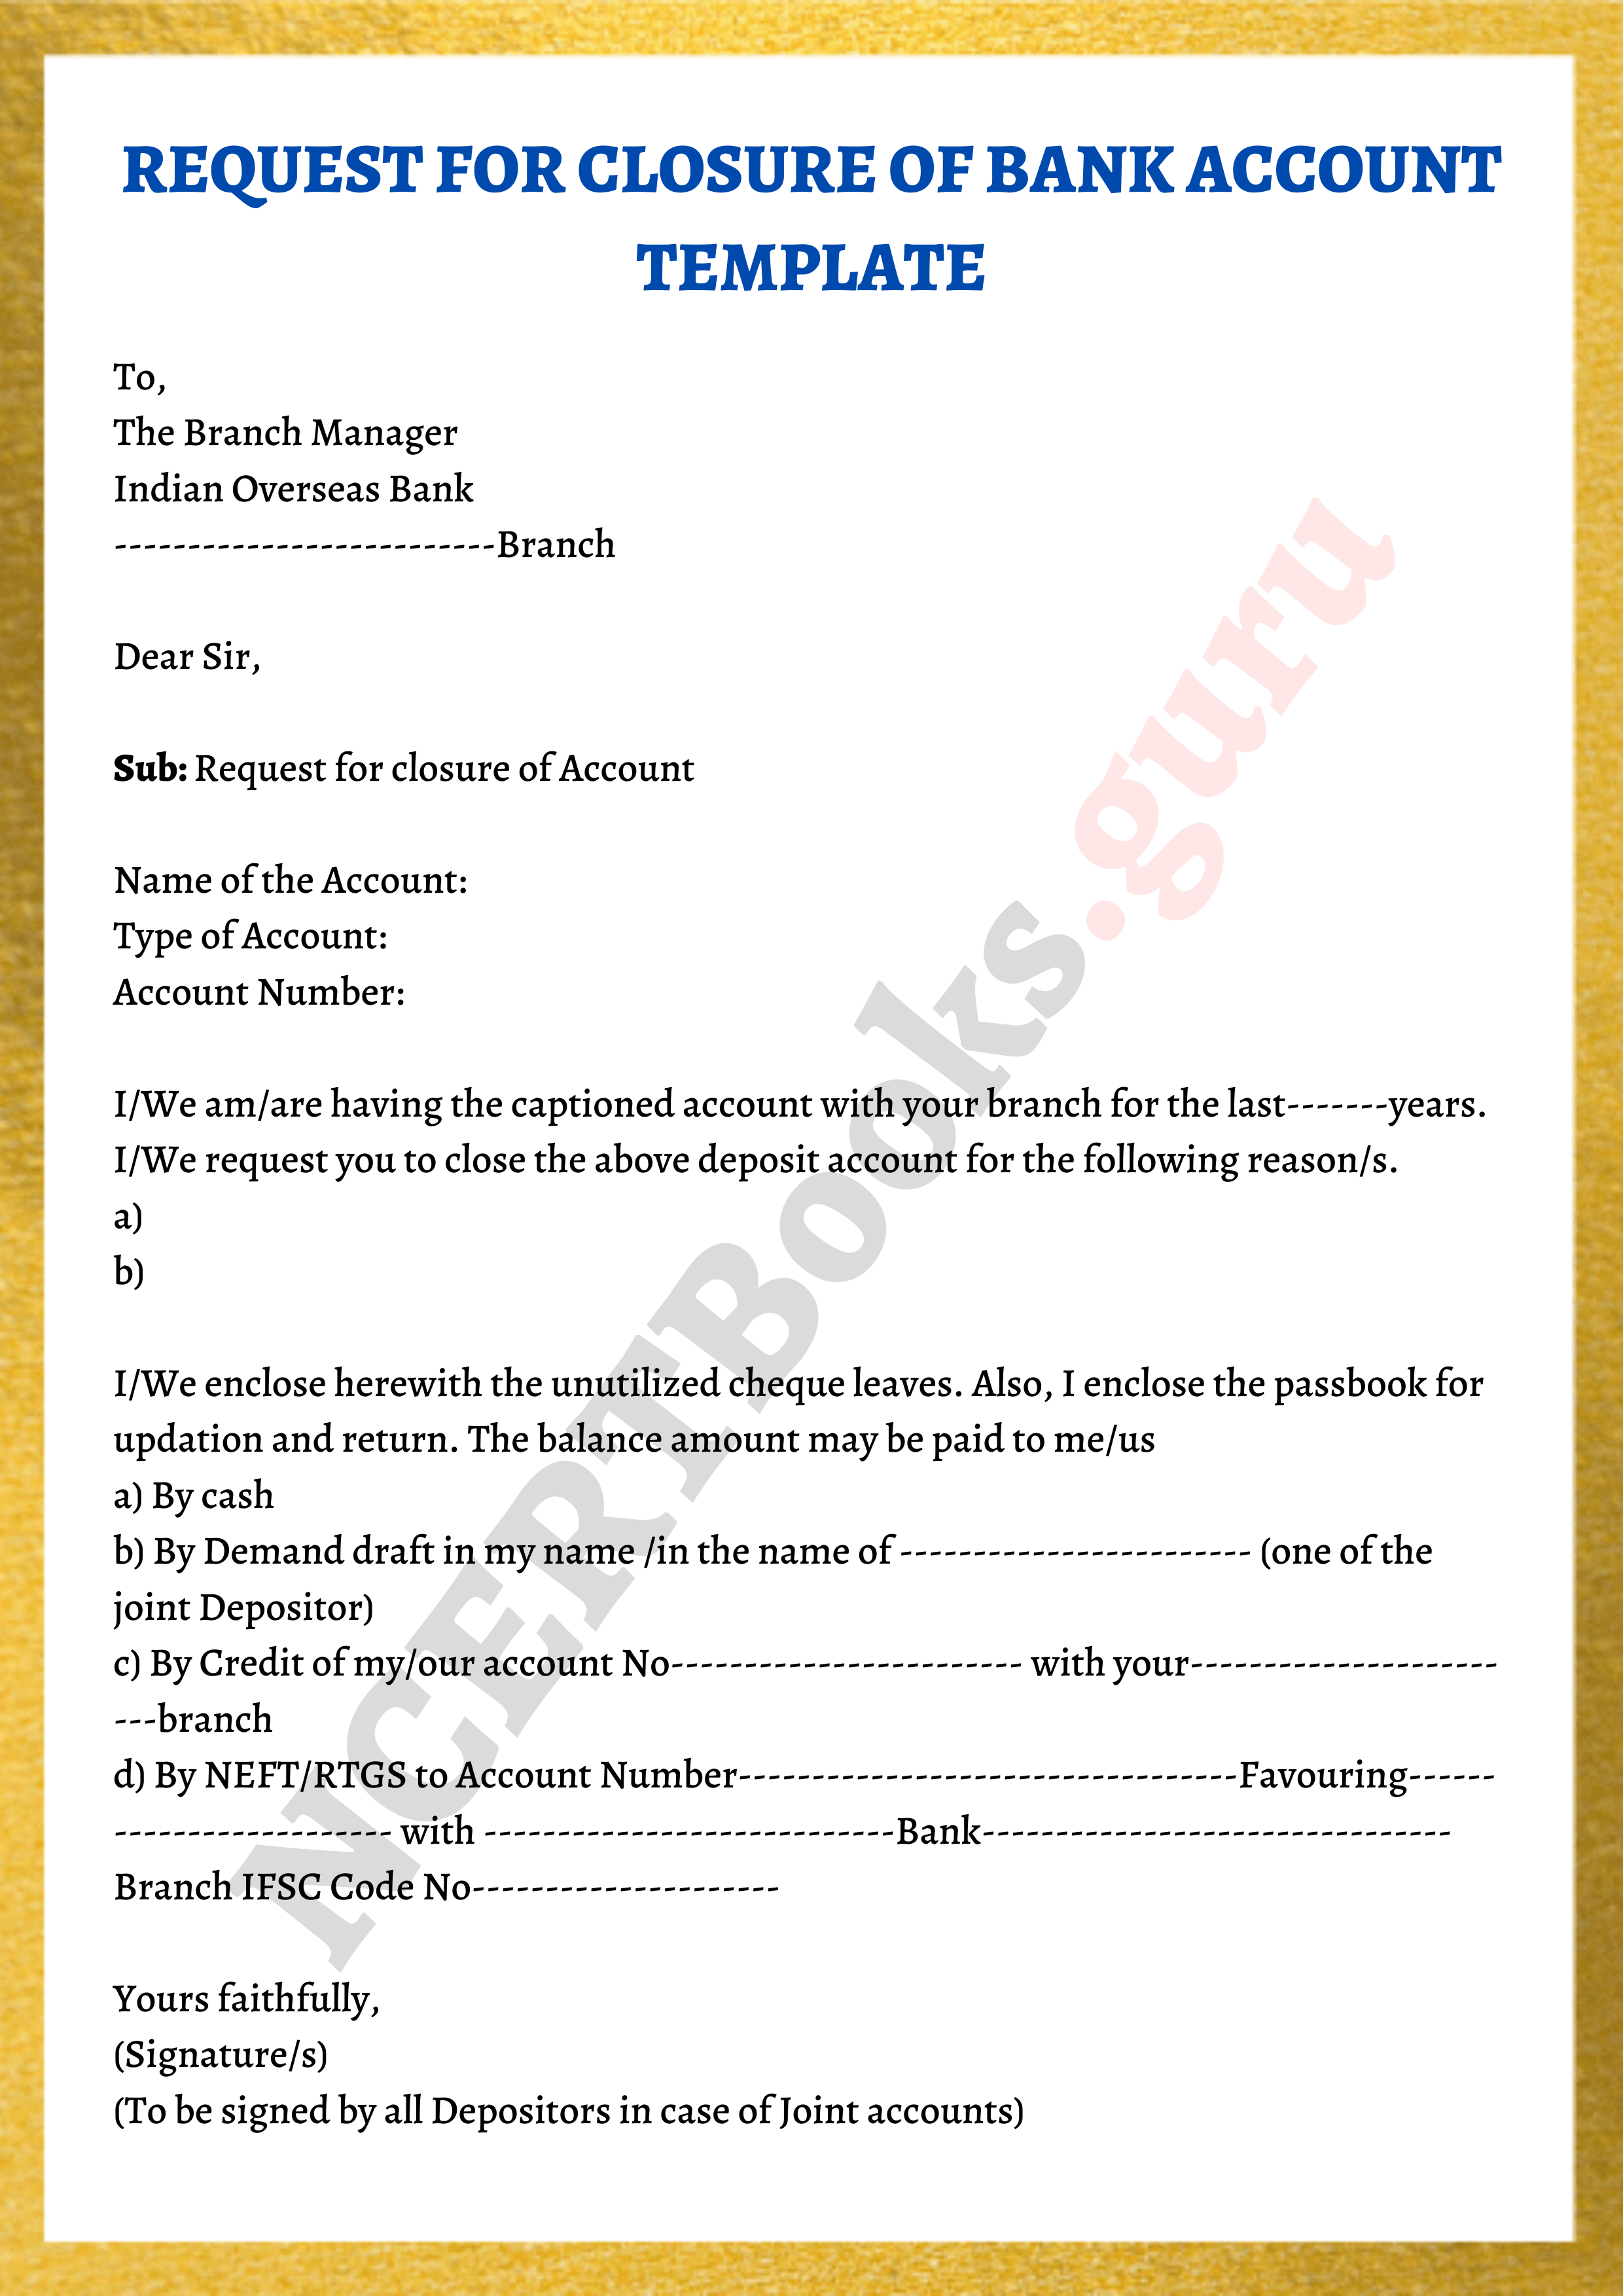 Template of letter to close the bank account